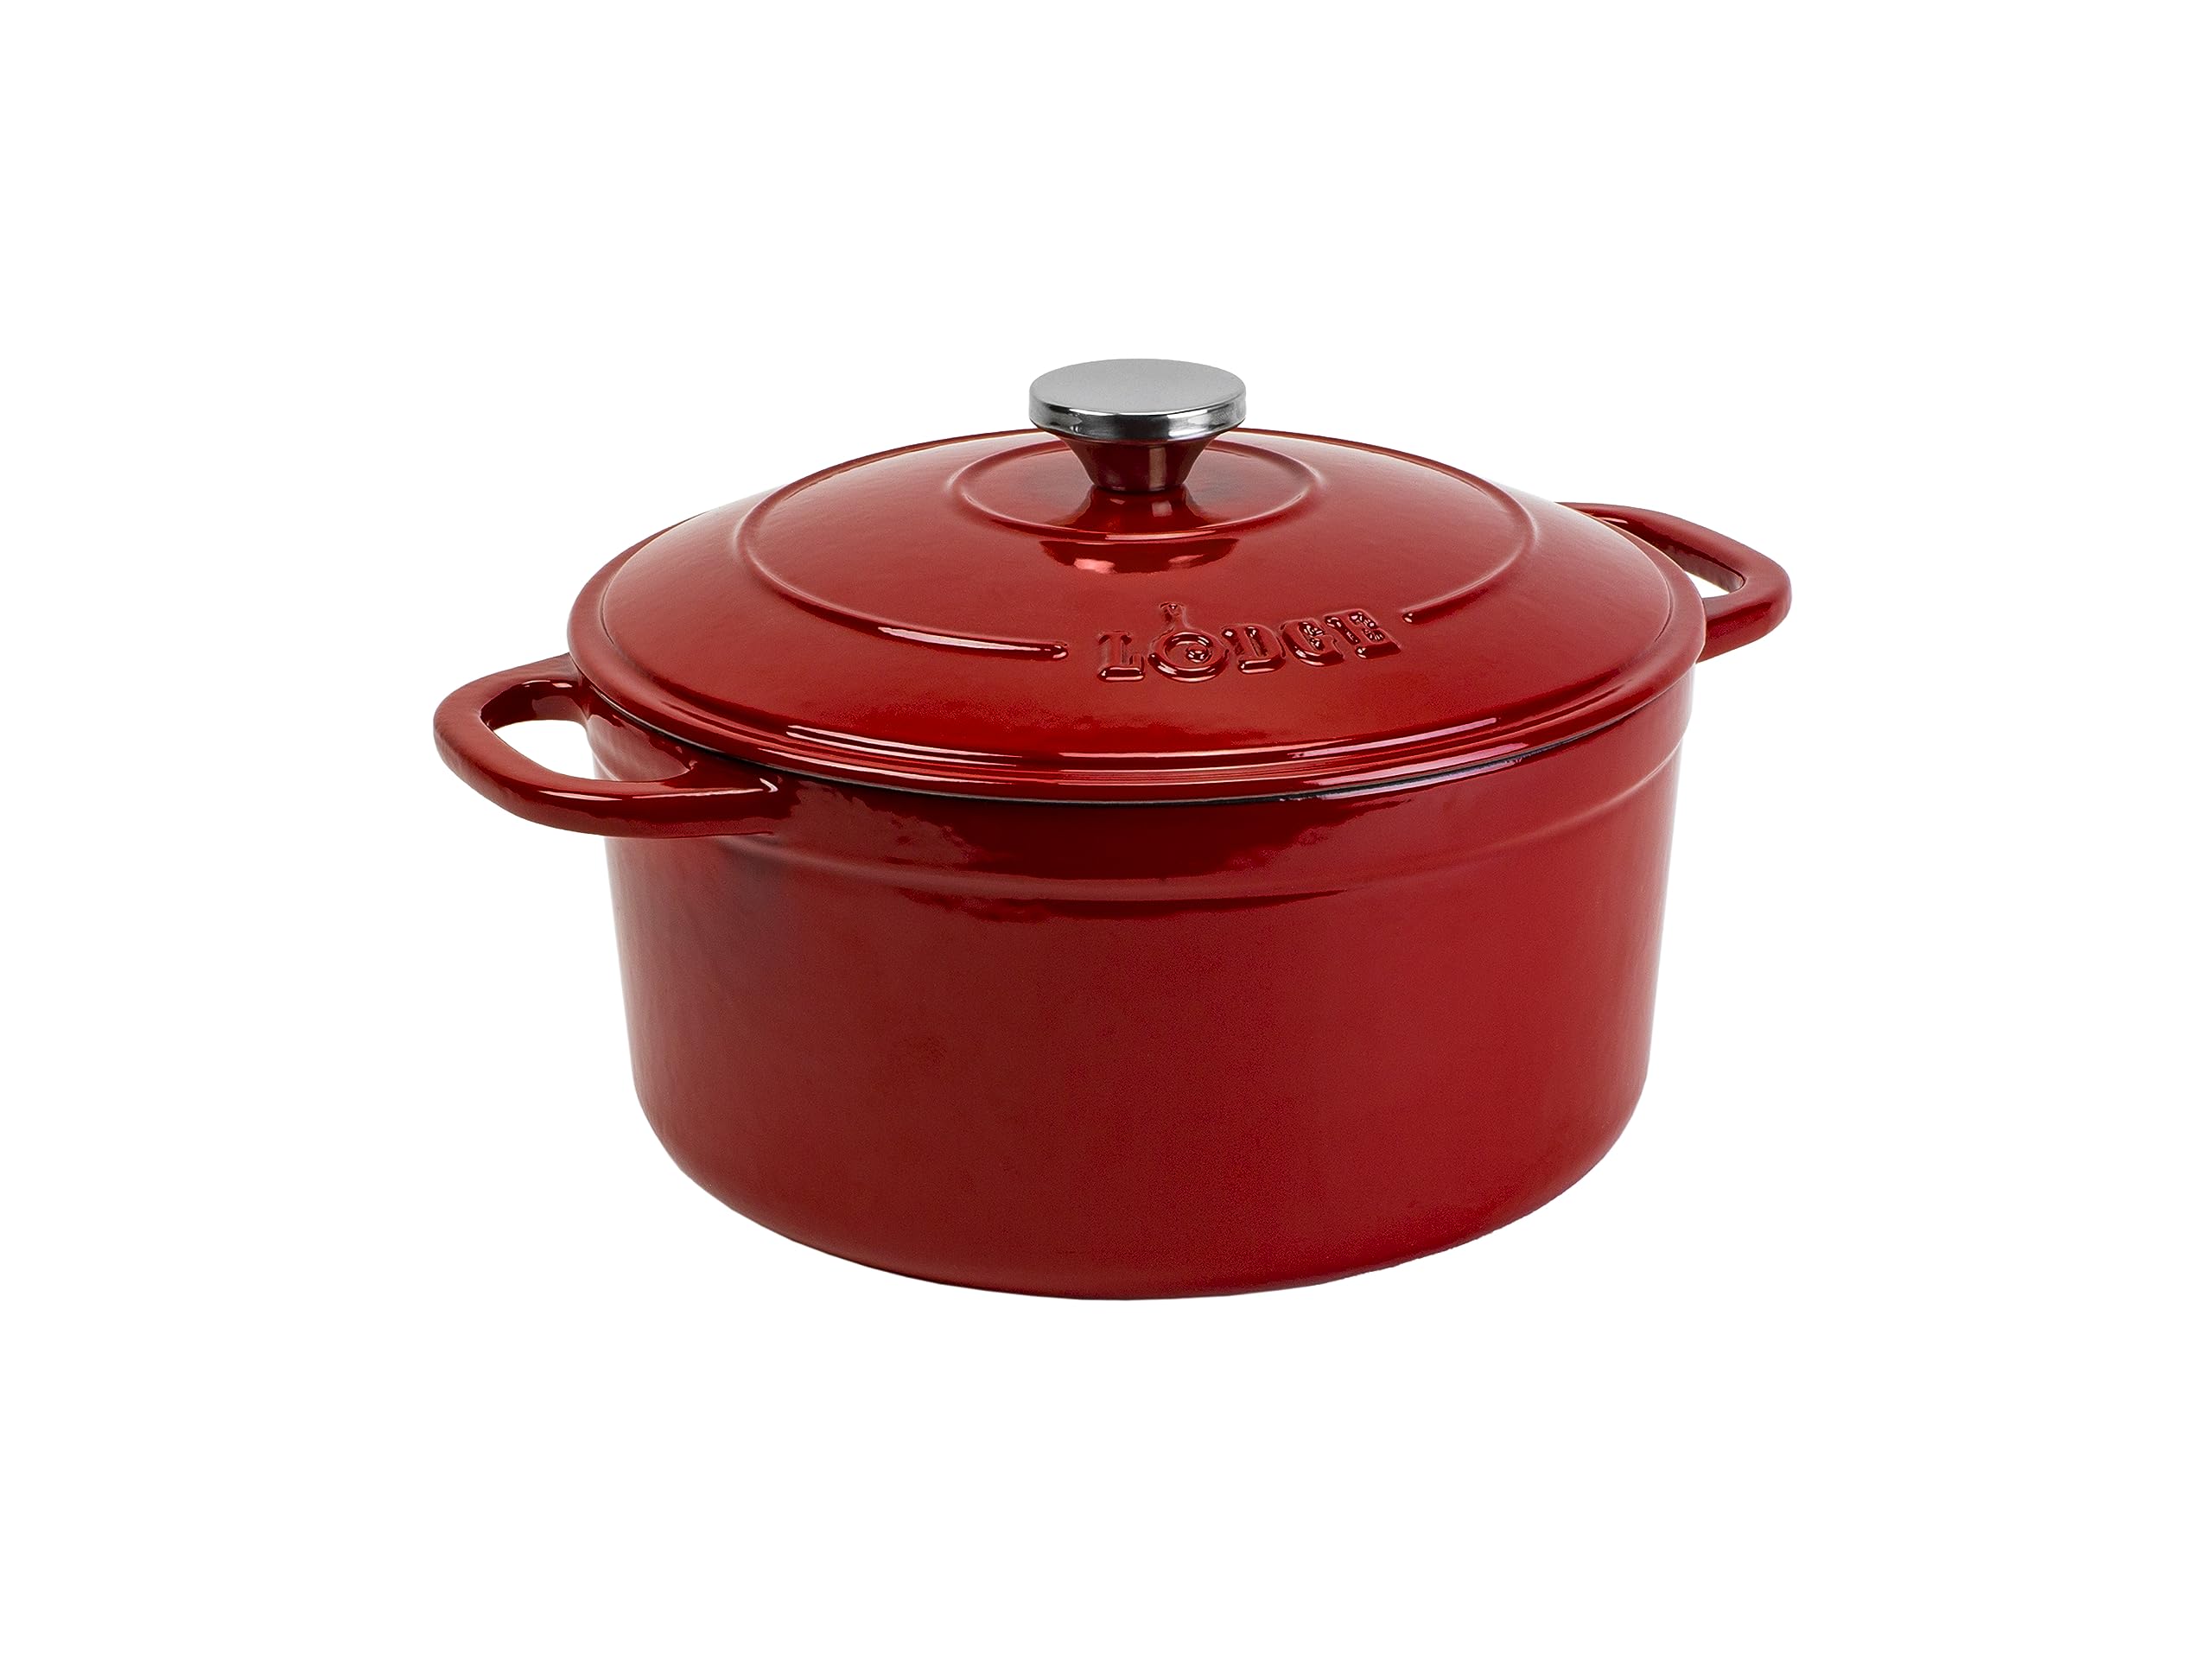 Lodge 6.5 Quart Enameled Cast Iron Dutch Oven with Lid – Dual Handles – Oven Safe up to 500° F or on Stovetop - Use to Marinate, Cook, Bake, Refrigerate and Serve – Red